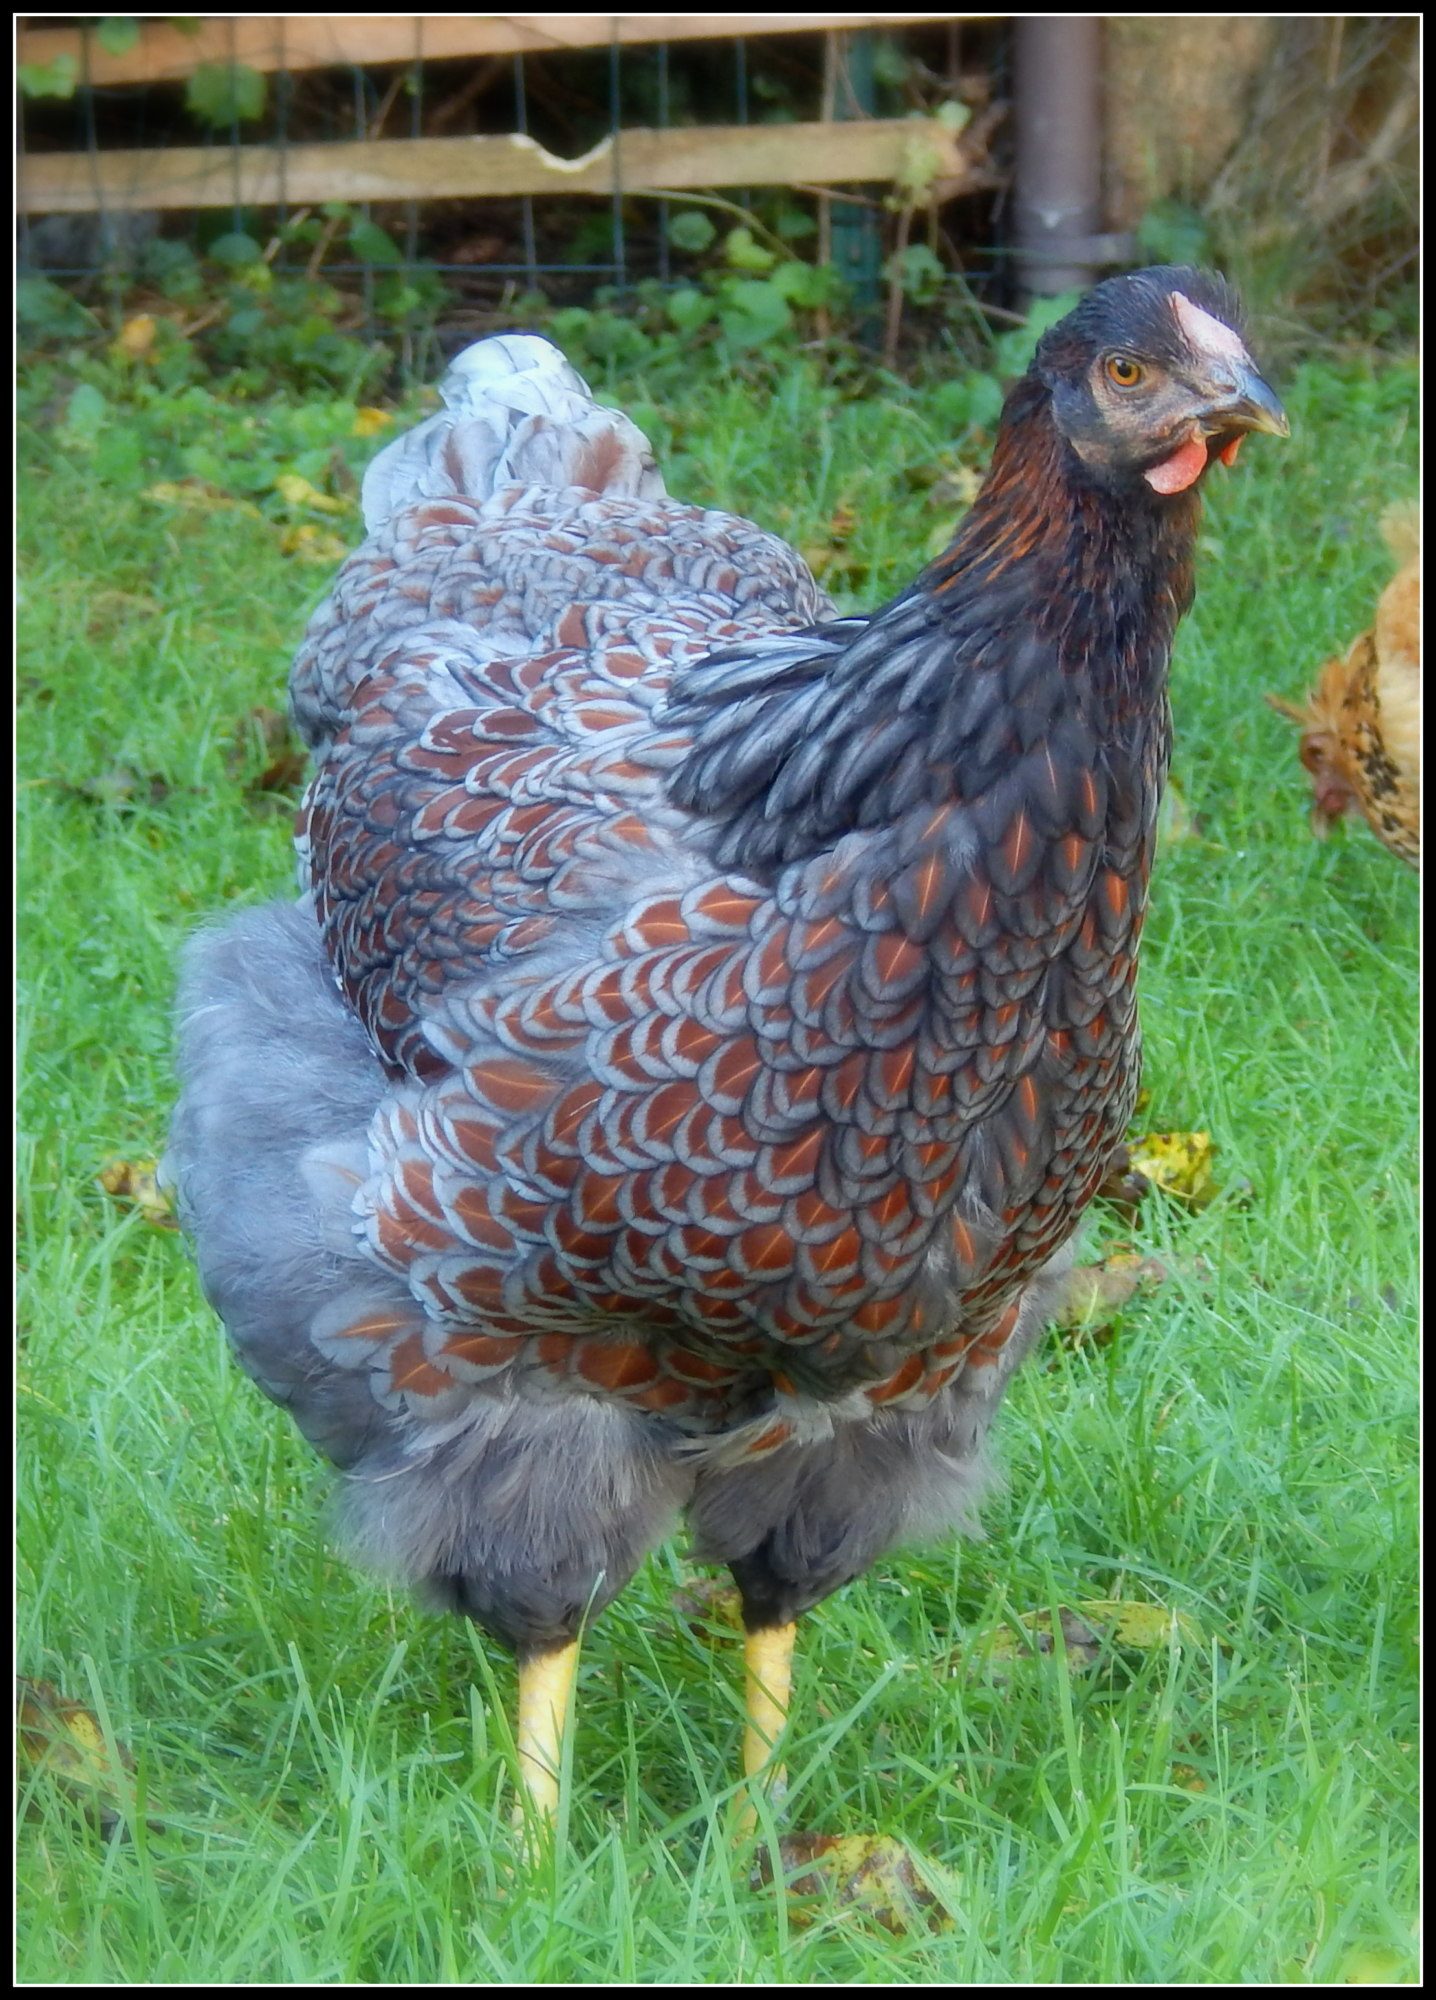 Clover, my 20 week old Blue Laced Red Wyandotte